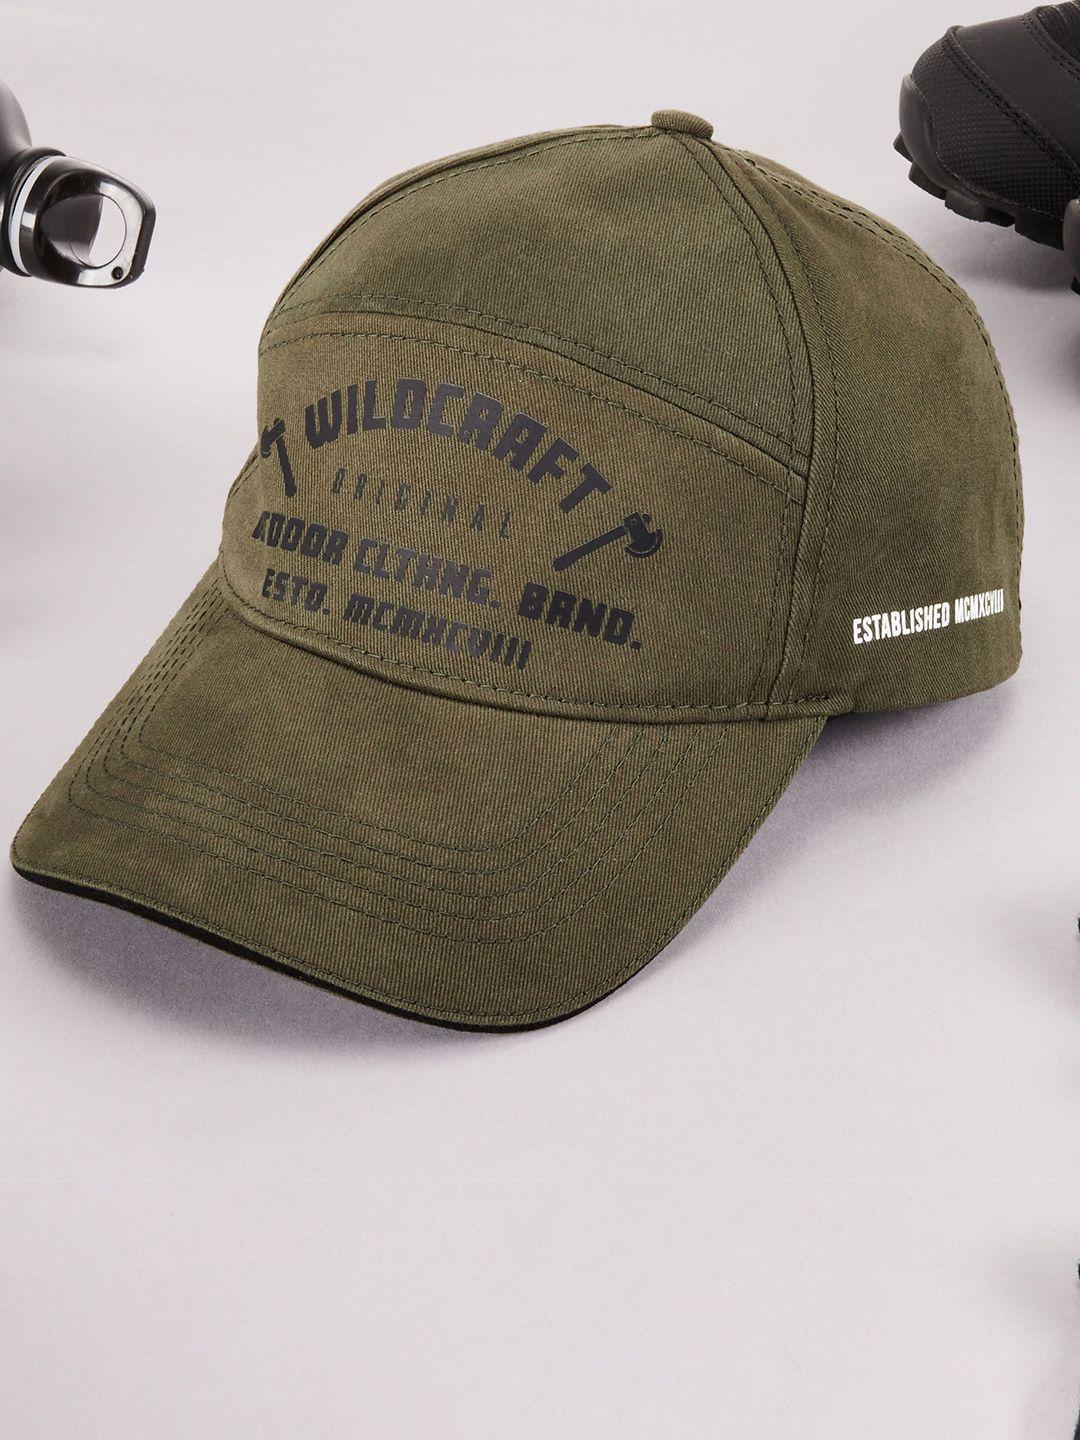 wildcraft adults olive green typography printed cotton baseball cap